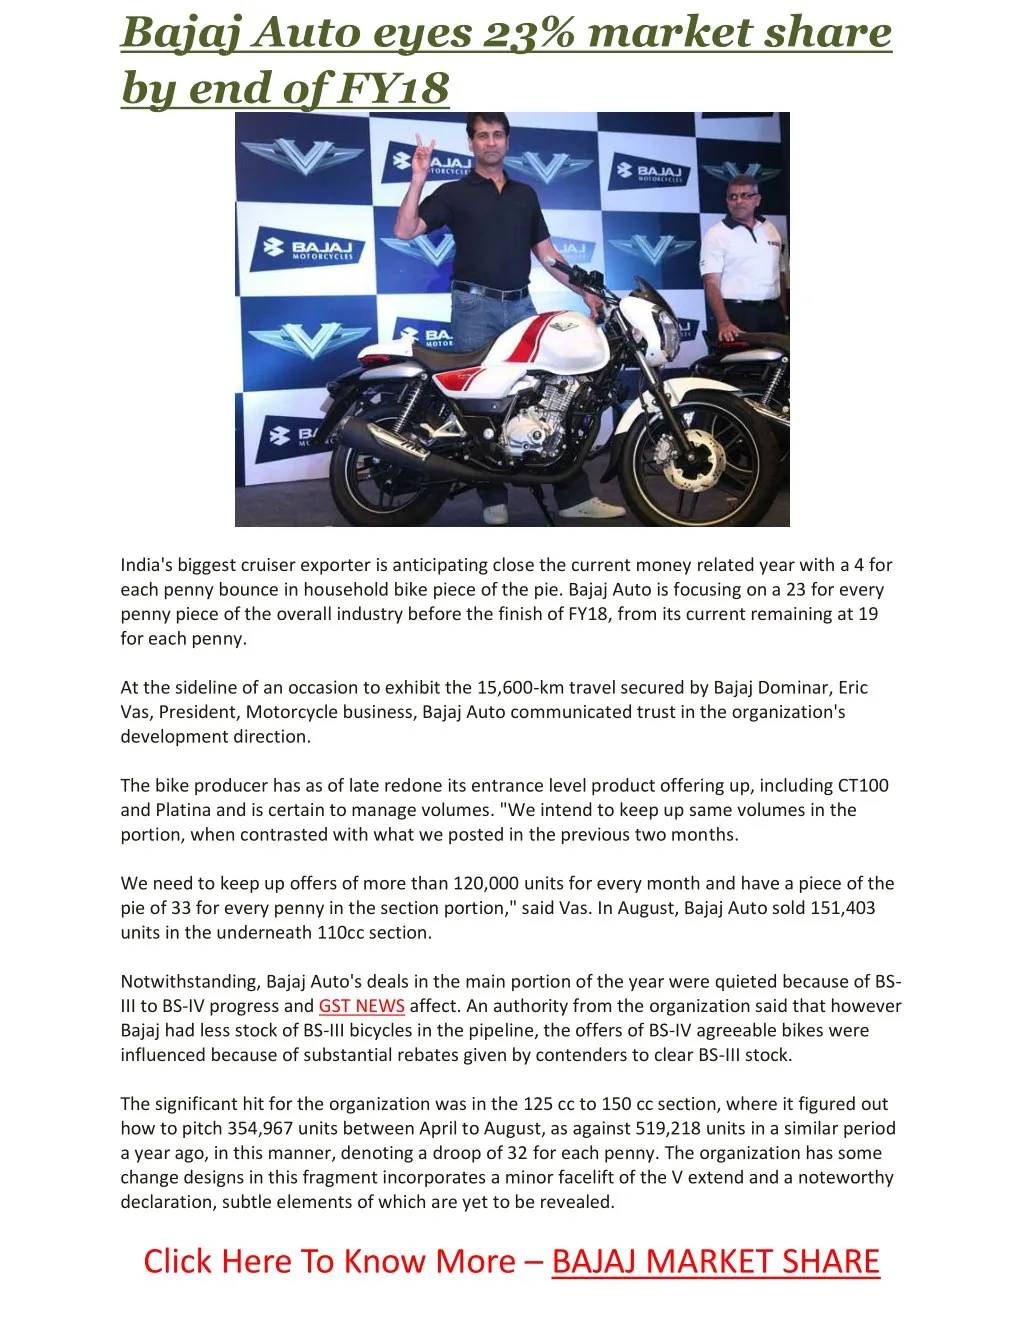 bajaj auto eyes 23 market share by end of fy18